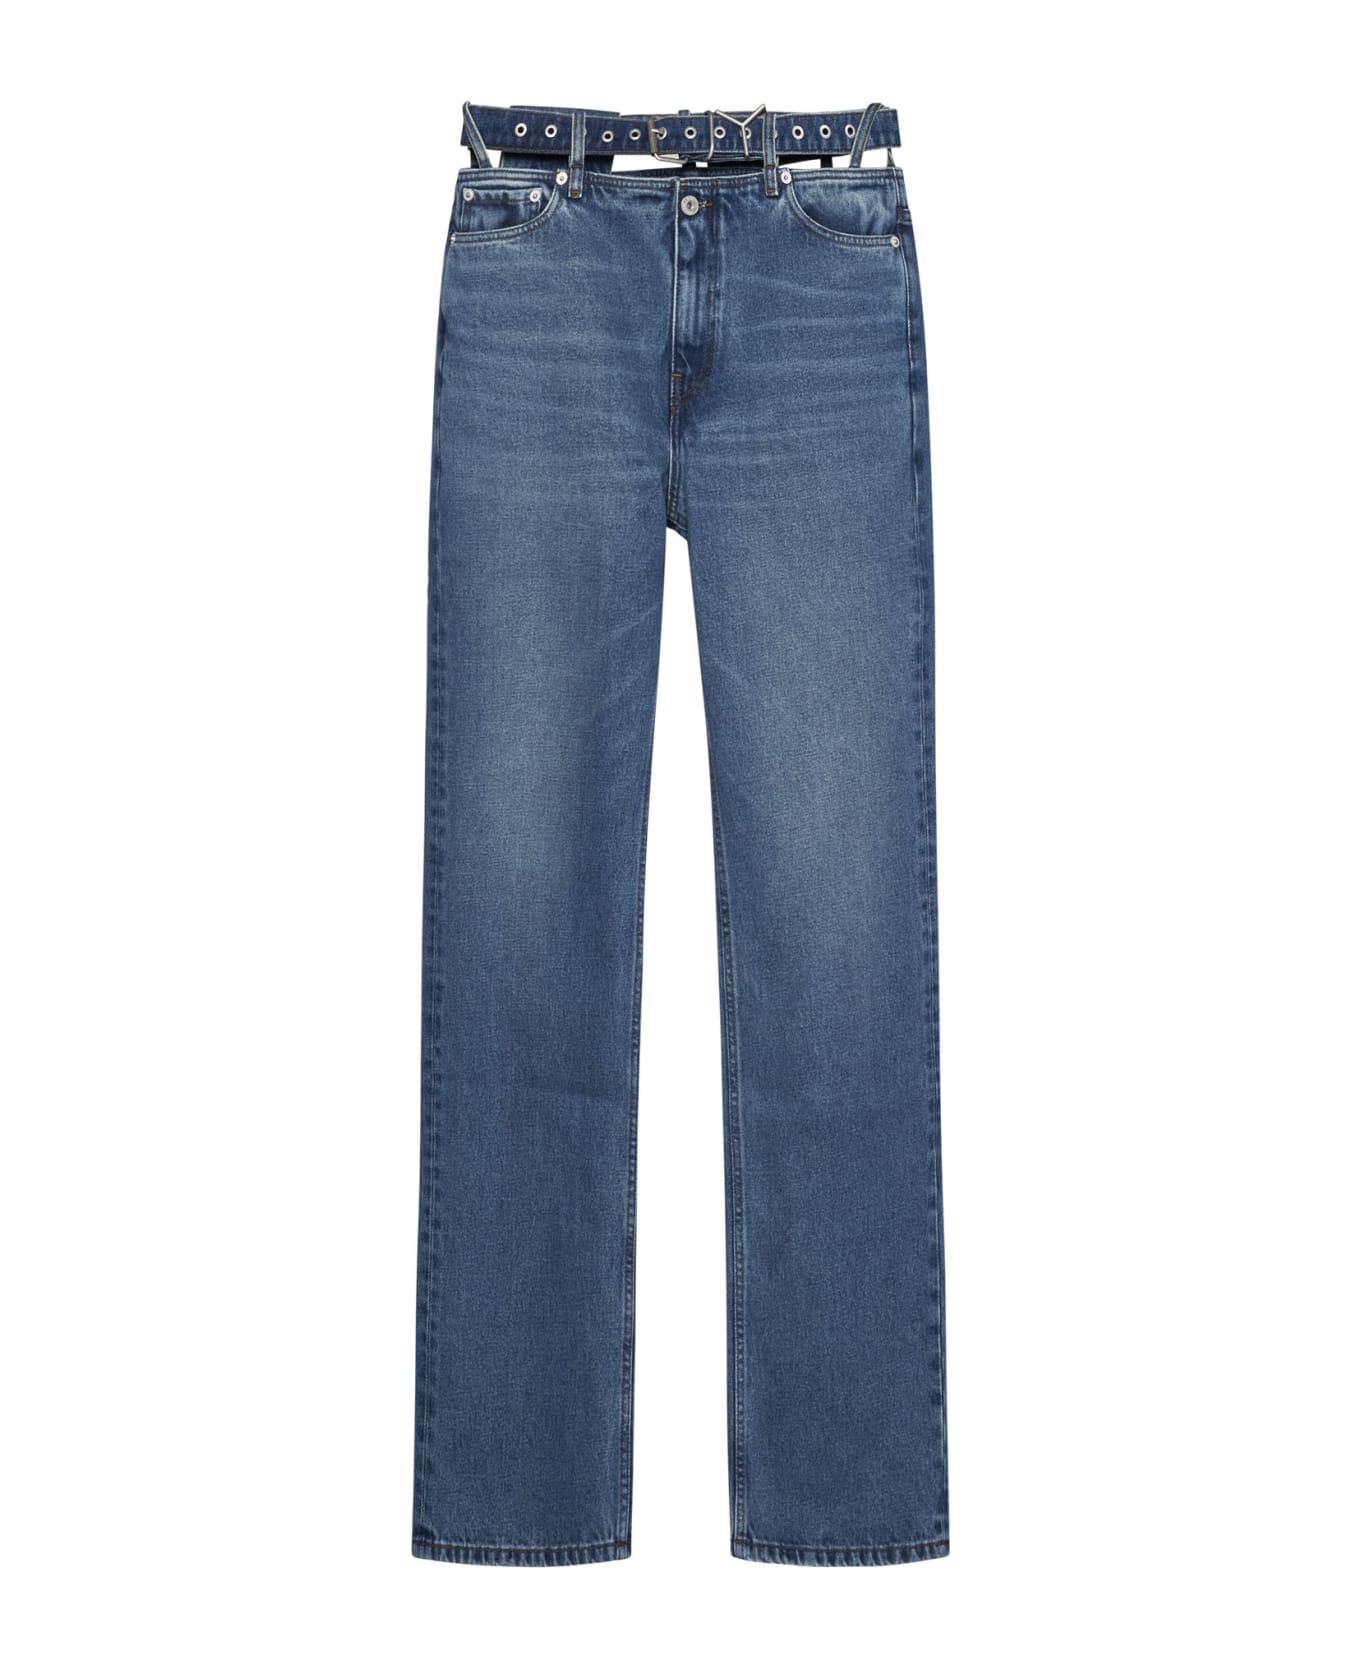 Y/Project Jeans - Evergreenvintageblue